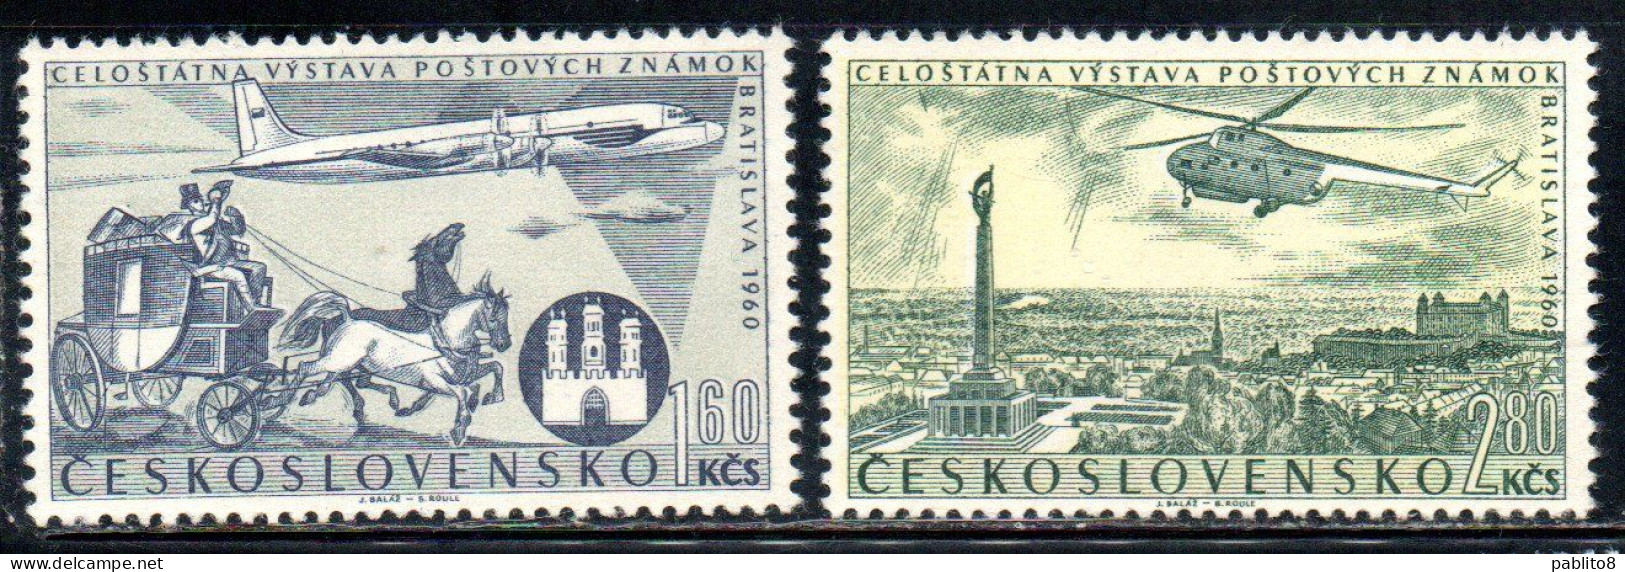 CZECHOSLOVAKIA CECOSLOVACCHIA 1960 AIR POST MAIL AIRMAIL NATIONAL STAMP EXHIBITION COMPLETE SET SERIE COMPLETA MNH - Airmail